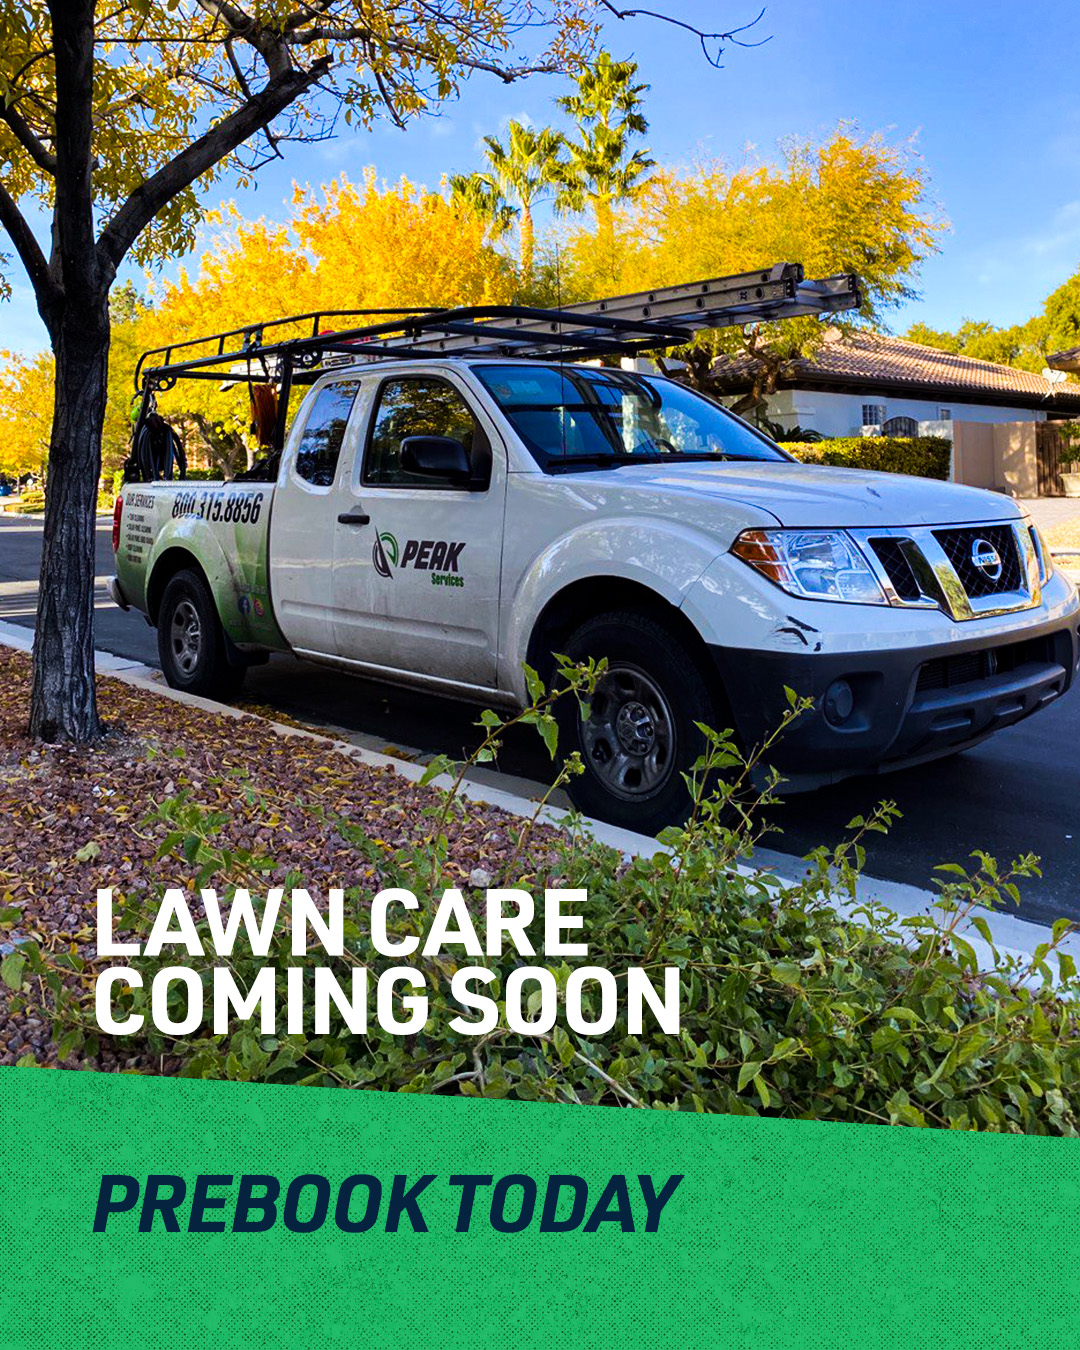 Discover Our New Lawn Care Services